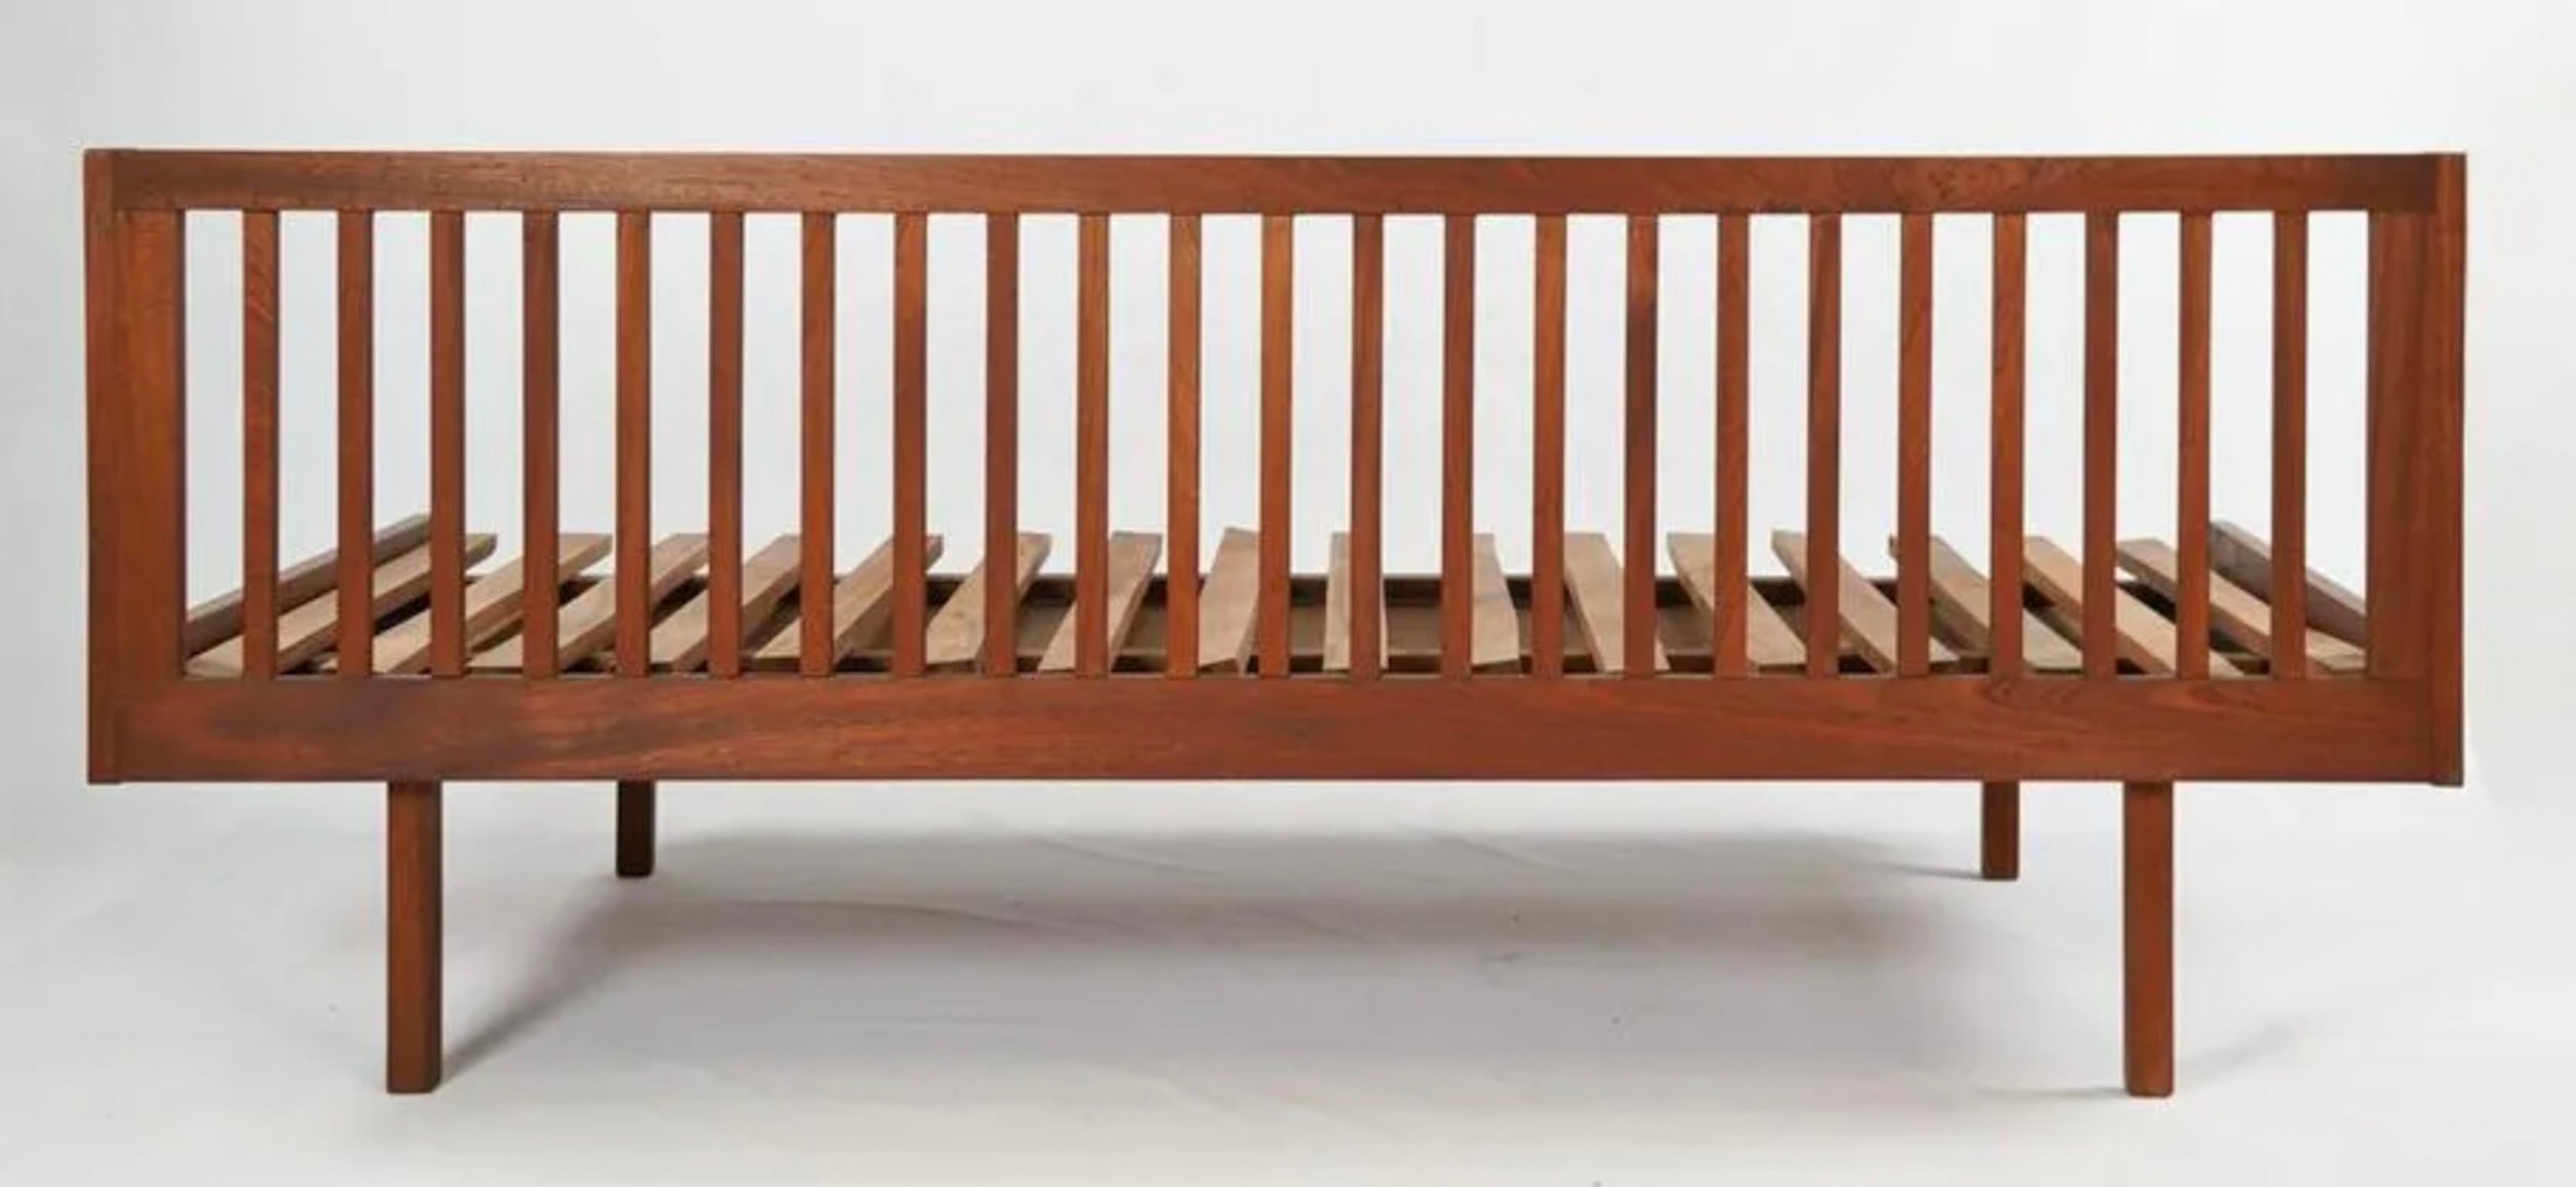 Custom Studio Craft Handmade midcentury Solid teak sofa or daybed or twin bed frame in teak wood with slatted frame backrest. No Cushions and no side arms or back rest cushions. Use as a daybed or sofa or Twin bed frame. Maker Unknown - Studio Craft